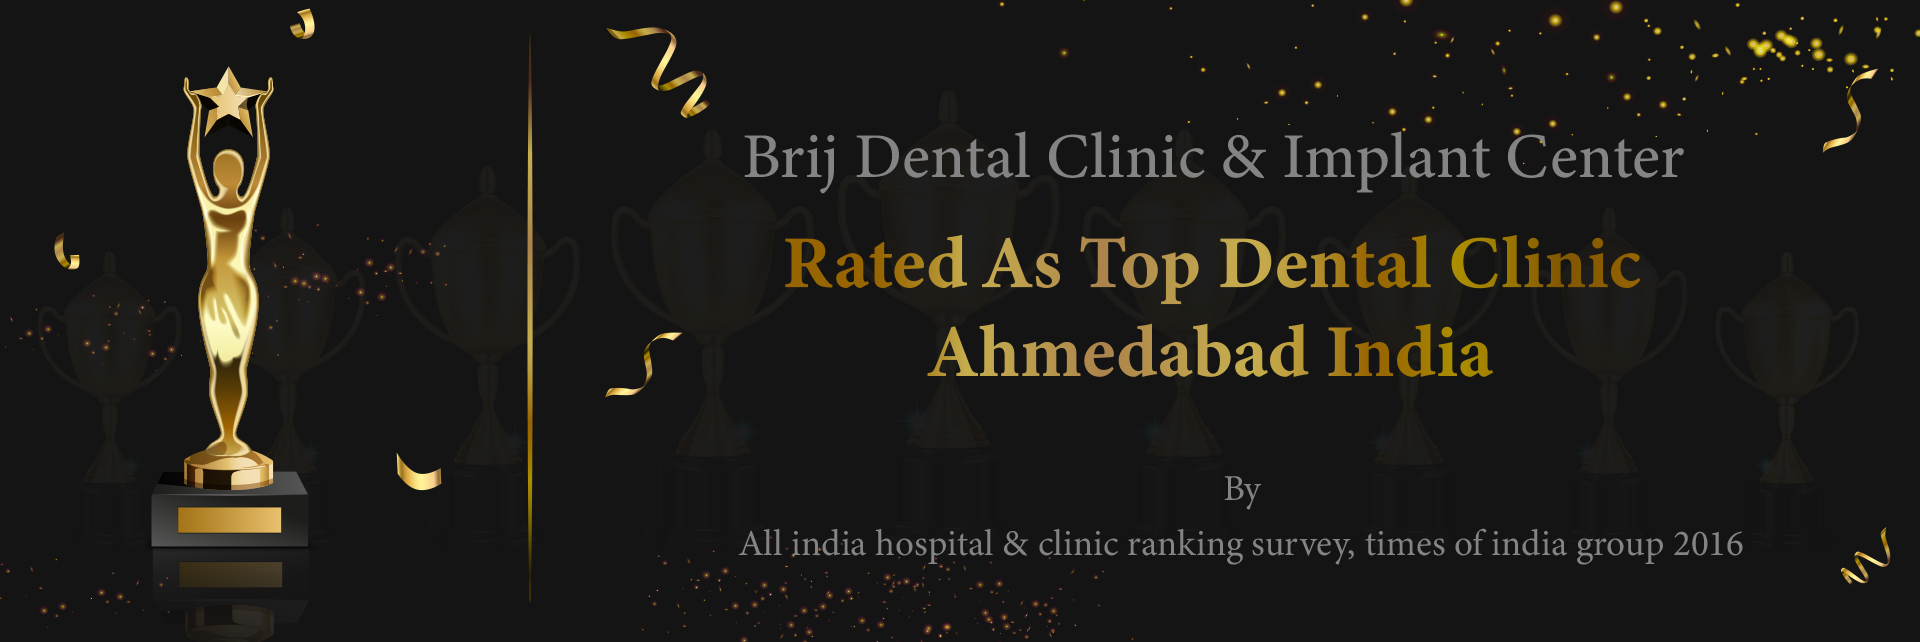 Brij Dental Clinic, Rated As Top Dentist, Dental Clinic in Ahmedabad, India